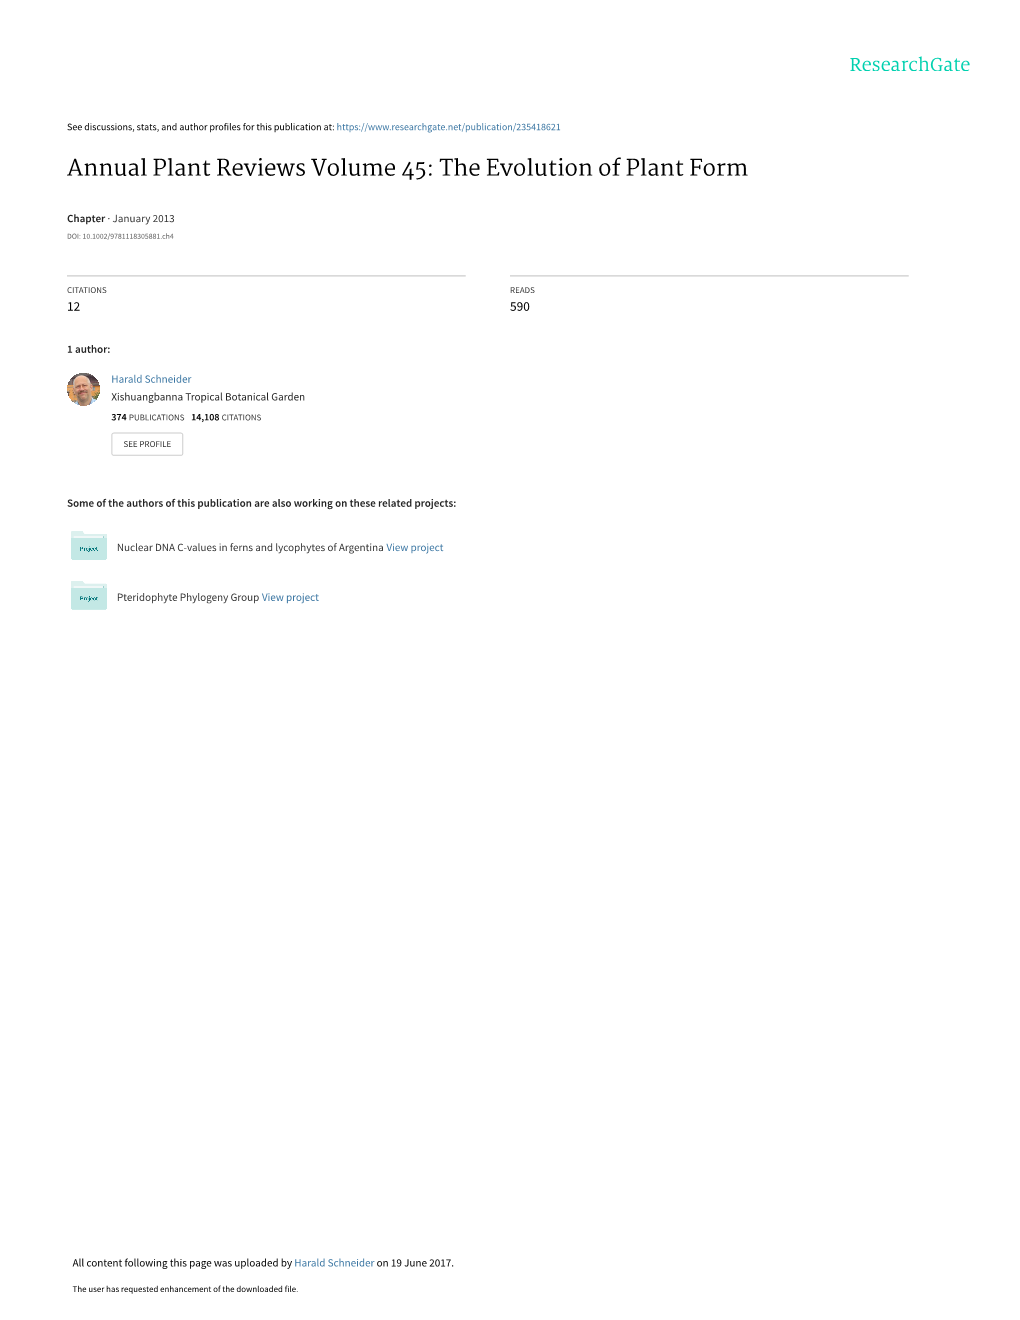 Annual Plant Reviews Volume 45: the Evolution of Plant Form